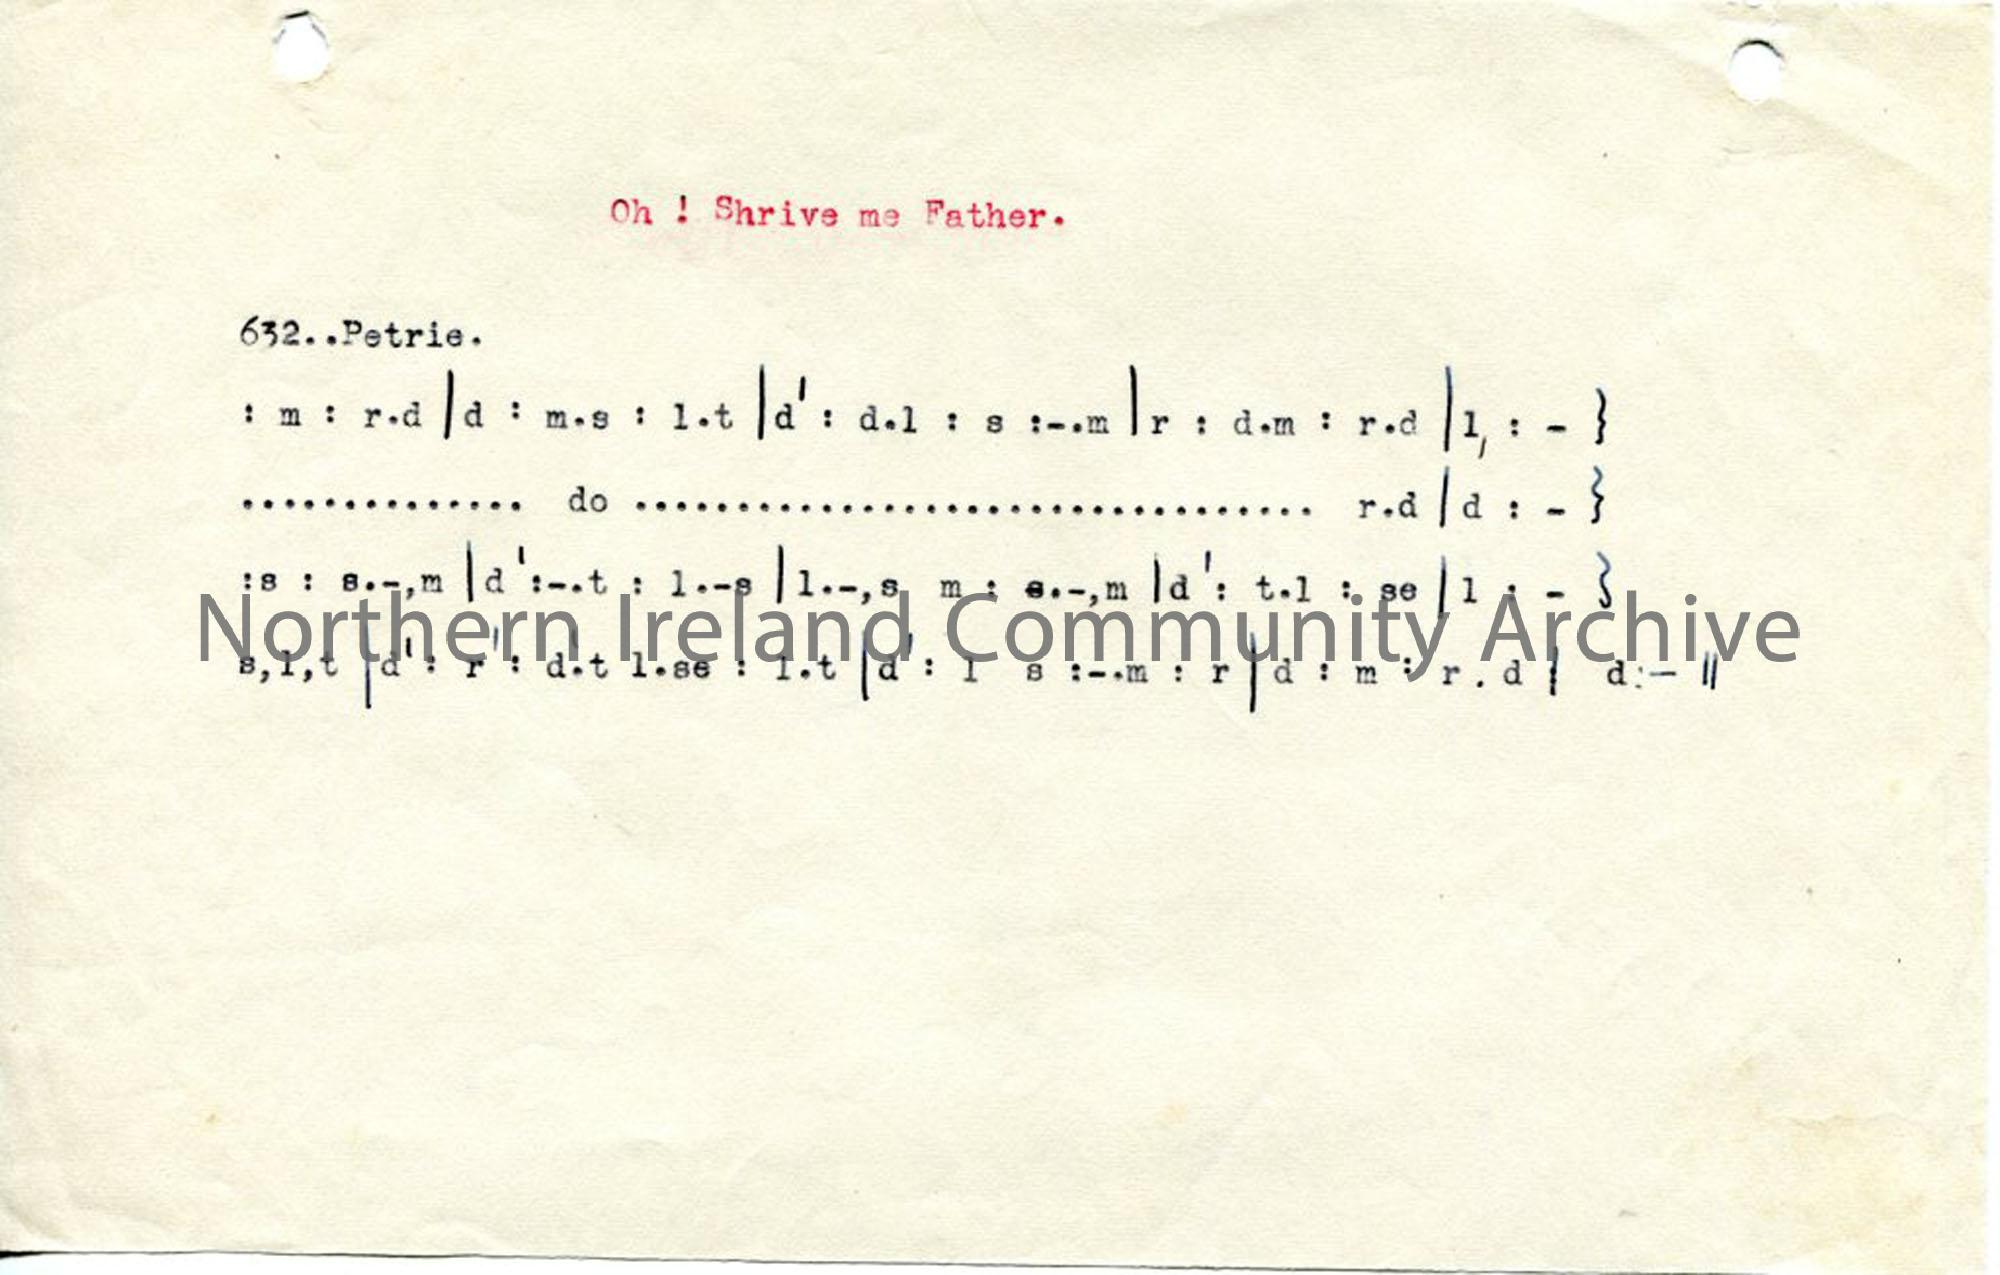 Typed tonic sol-fa notation to ‘Oh! Shrive me Father